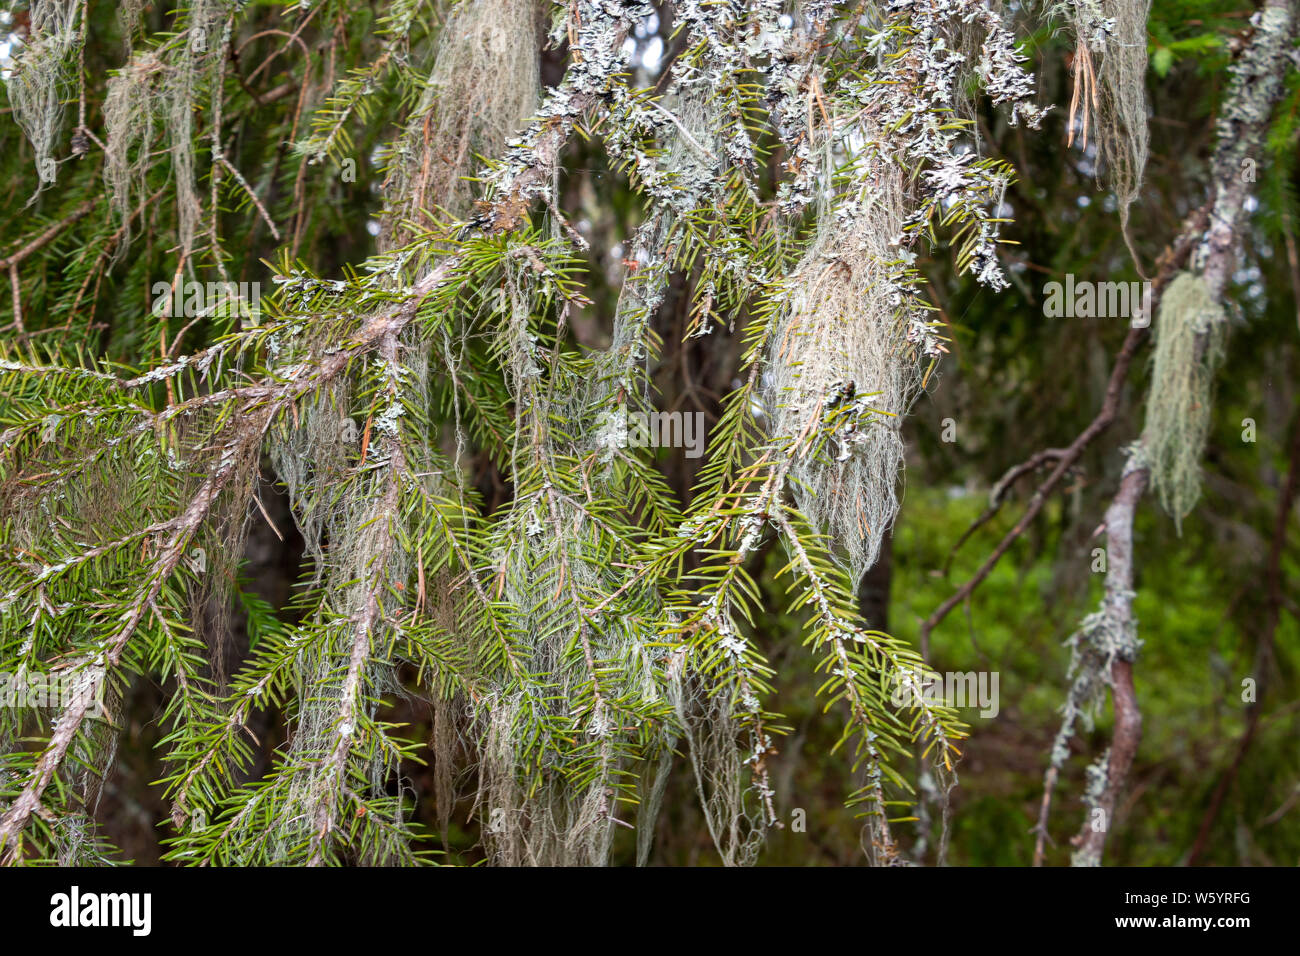 Usnea hanging in the trees like an old beard, and are symbolic for clean air, these mosses are antibiotic and eatable, picture taken in Sweden Stock Photo